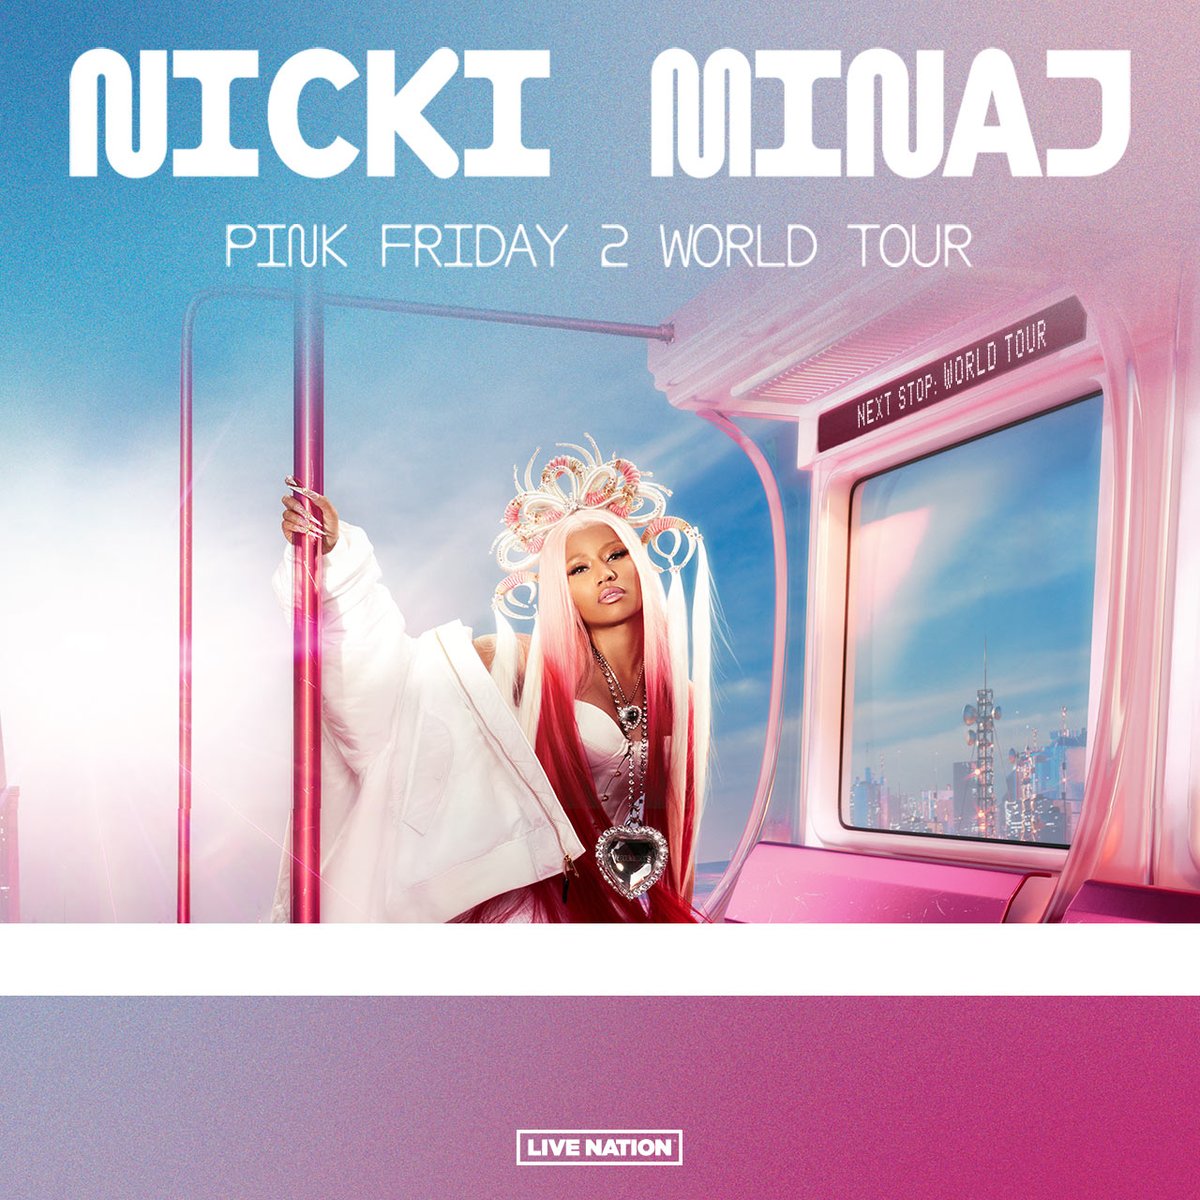 .@NICKIMINAJ's 'Pink Friday 2 World Tour' is officially the highest-grossing tour by a female rapper in history. It has earned over $67 million with more dates remaining.